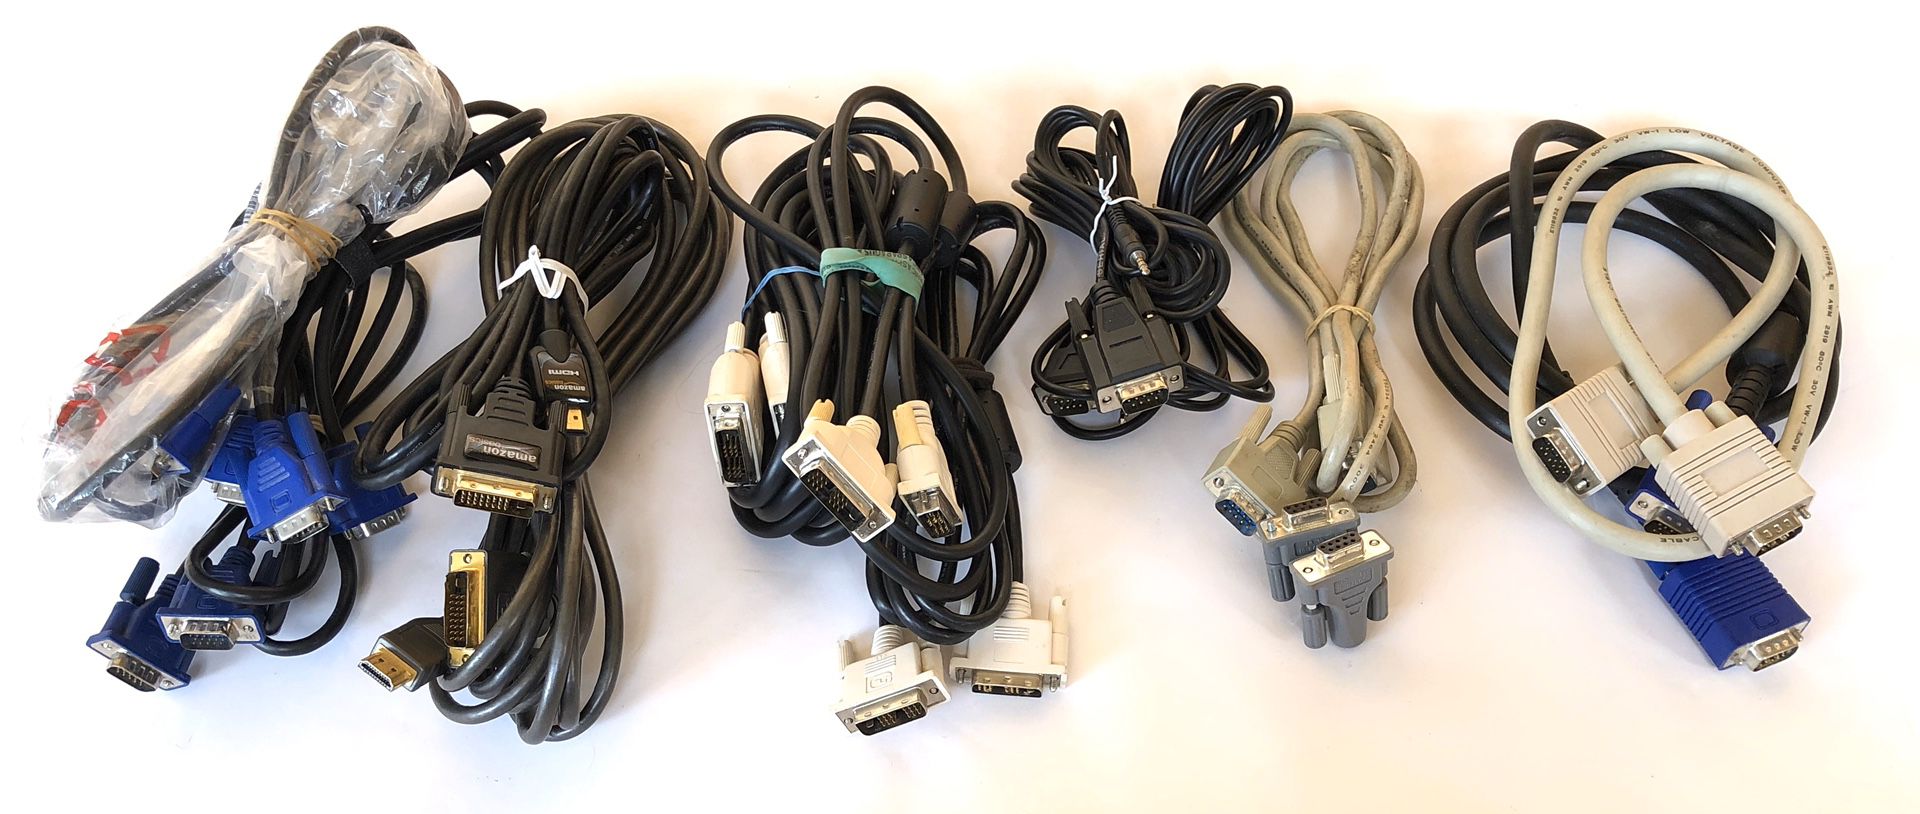 Assorted computer monitor and audio cables